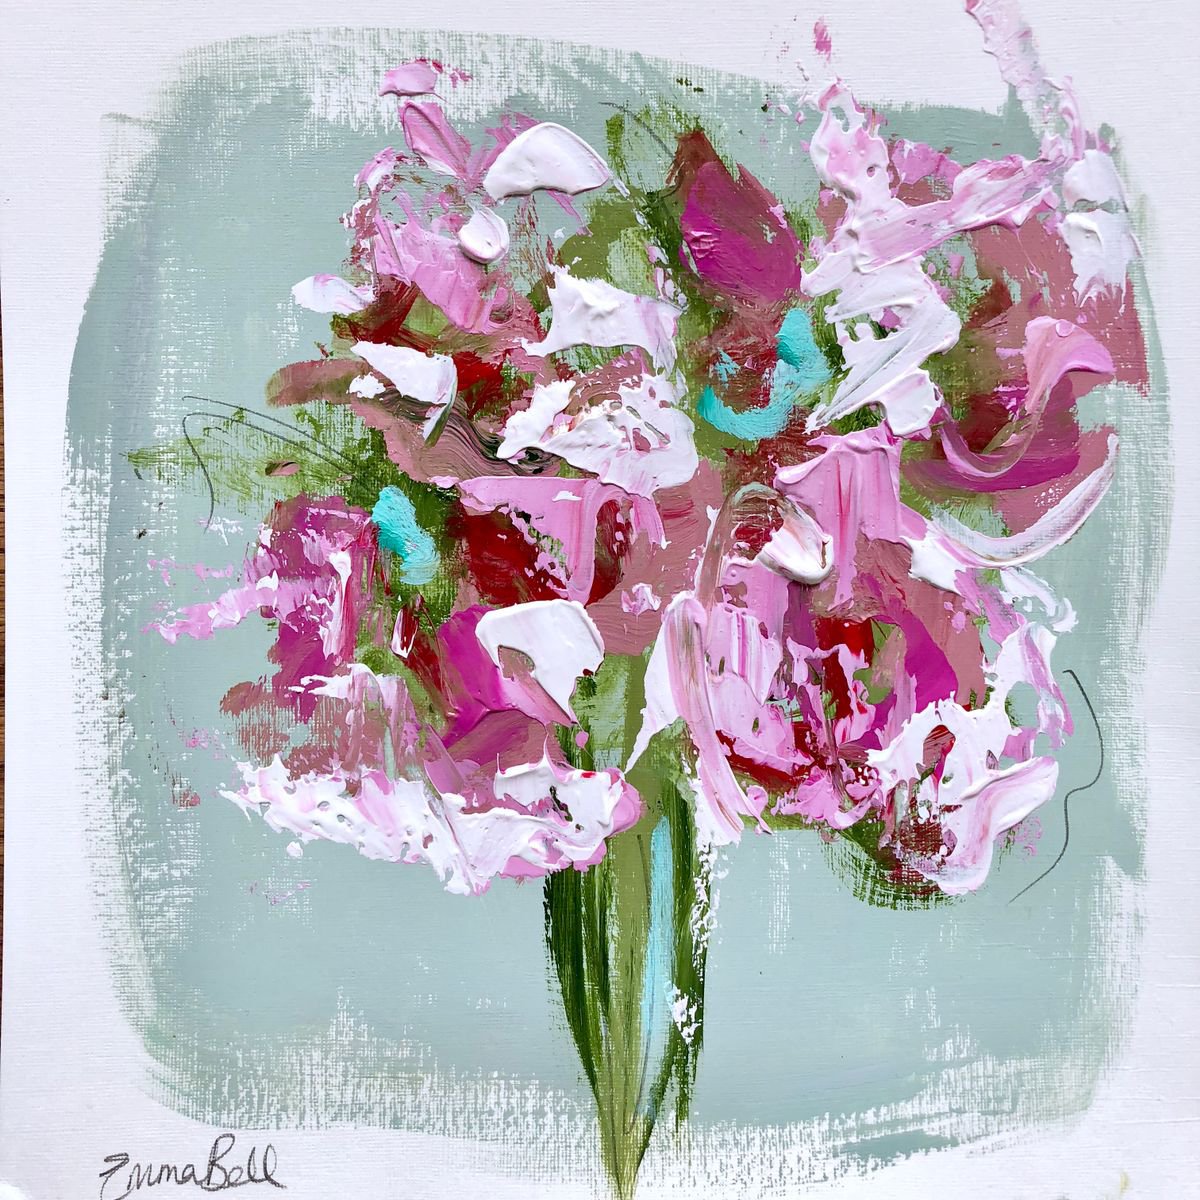 Pink Flower acrylic on paper by Emma Bell